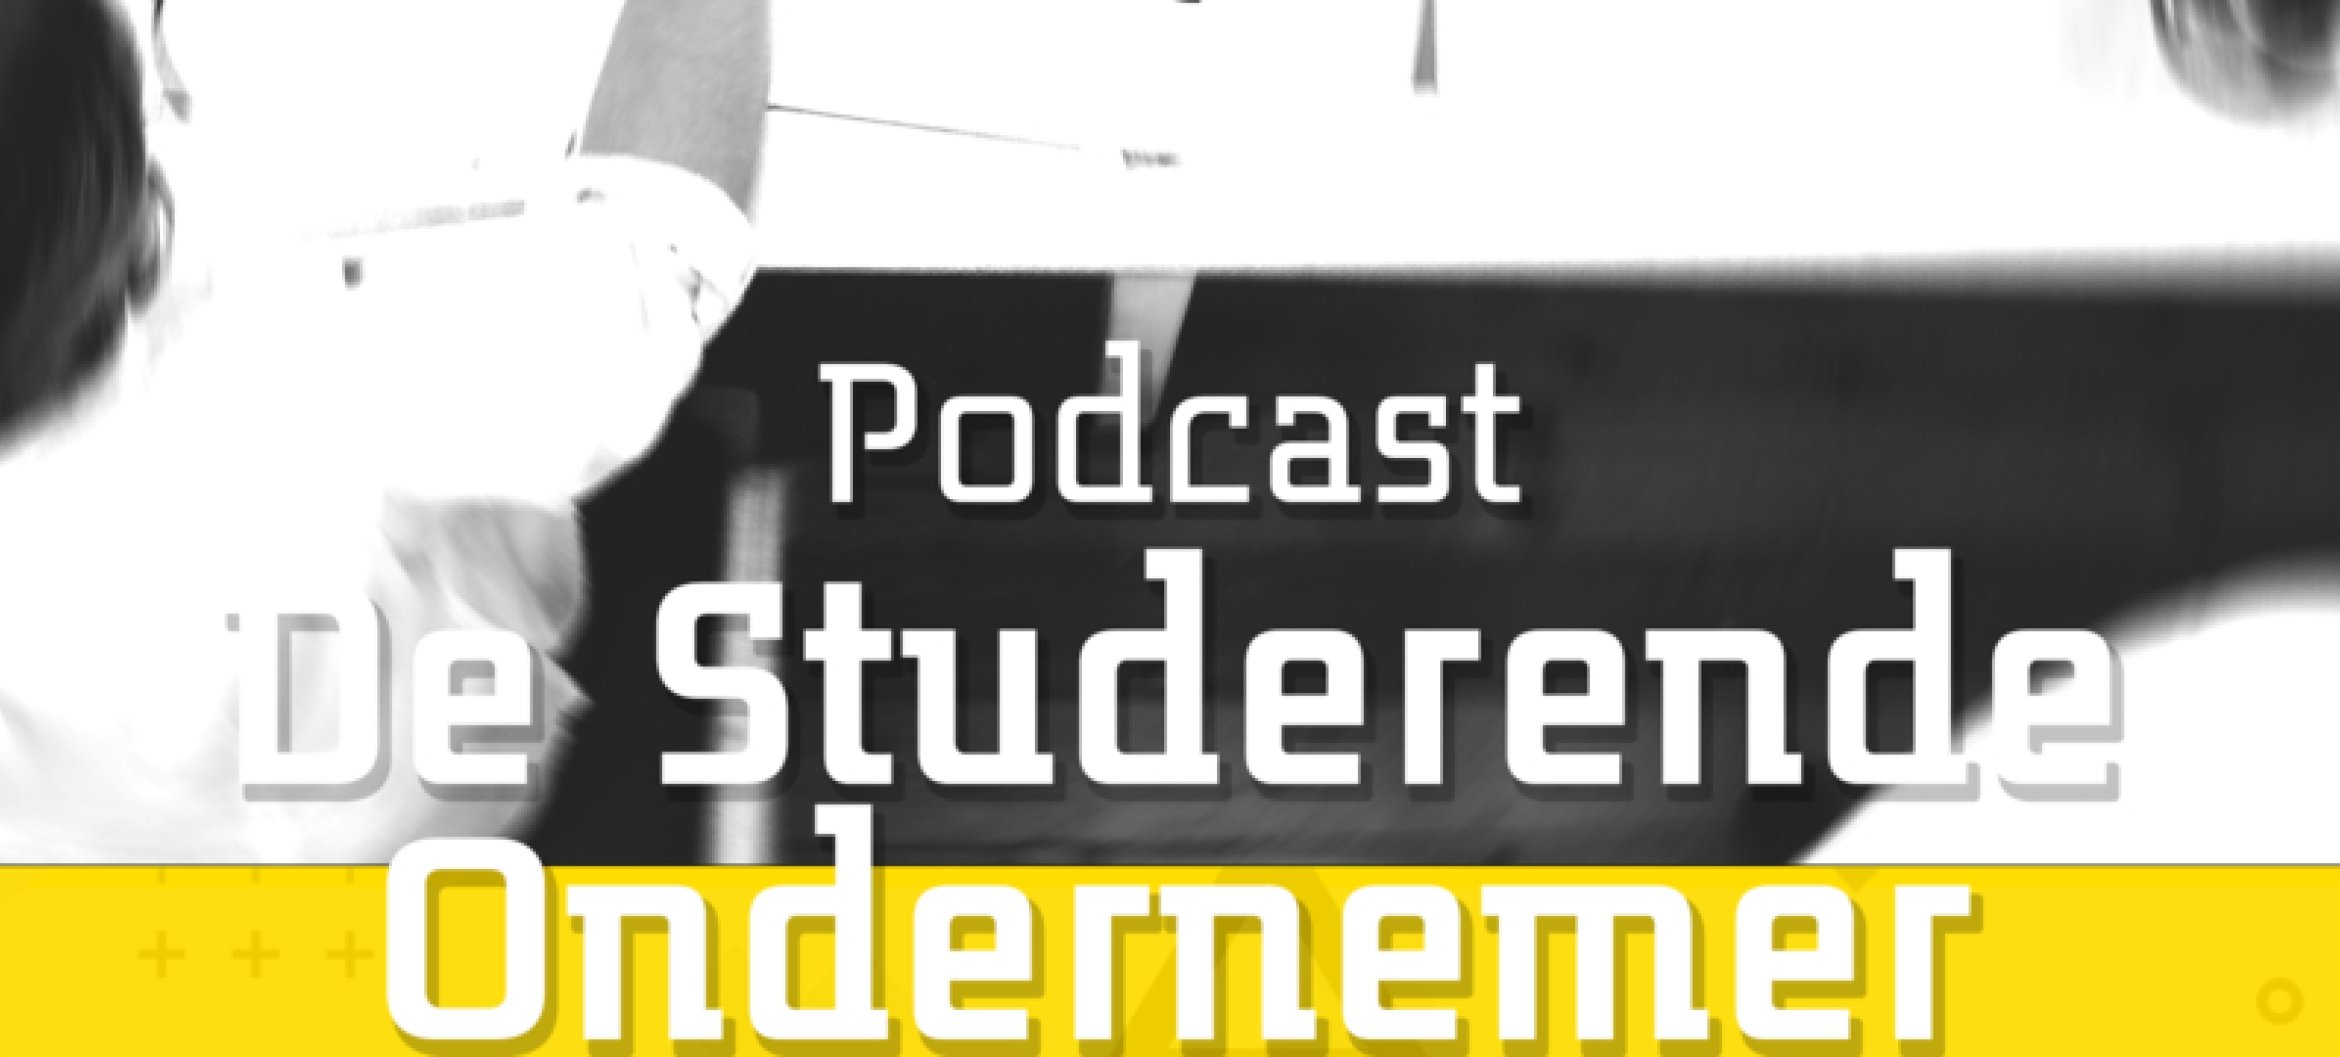 SPOTTED: MediaMusic students and teachers talk about entrepreneurship in podcast